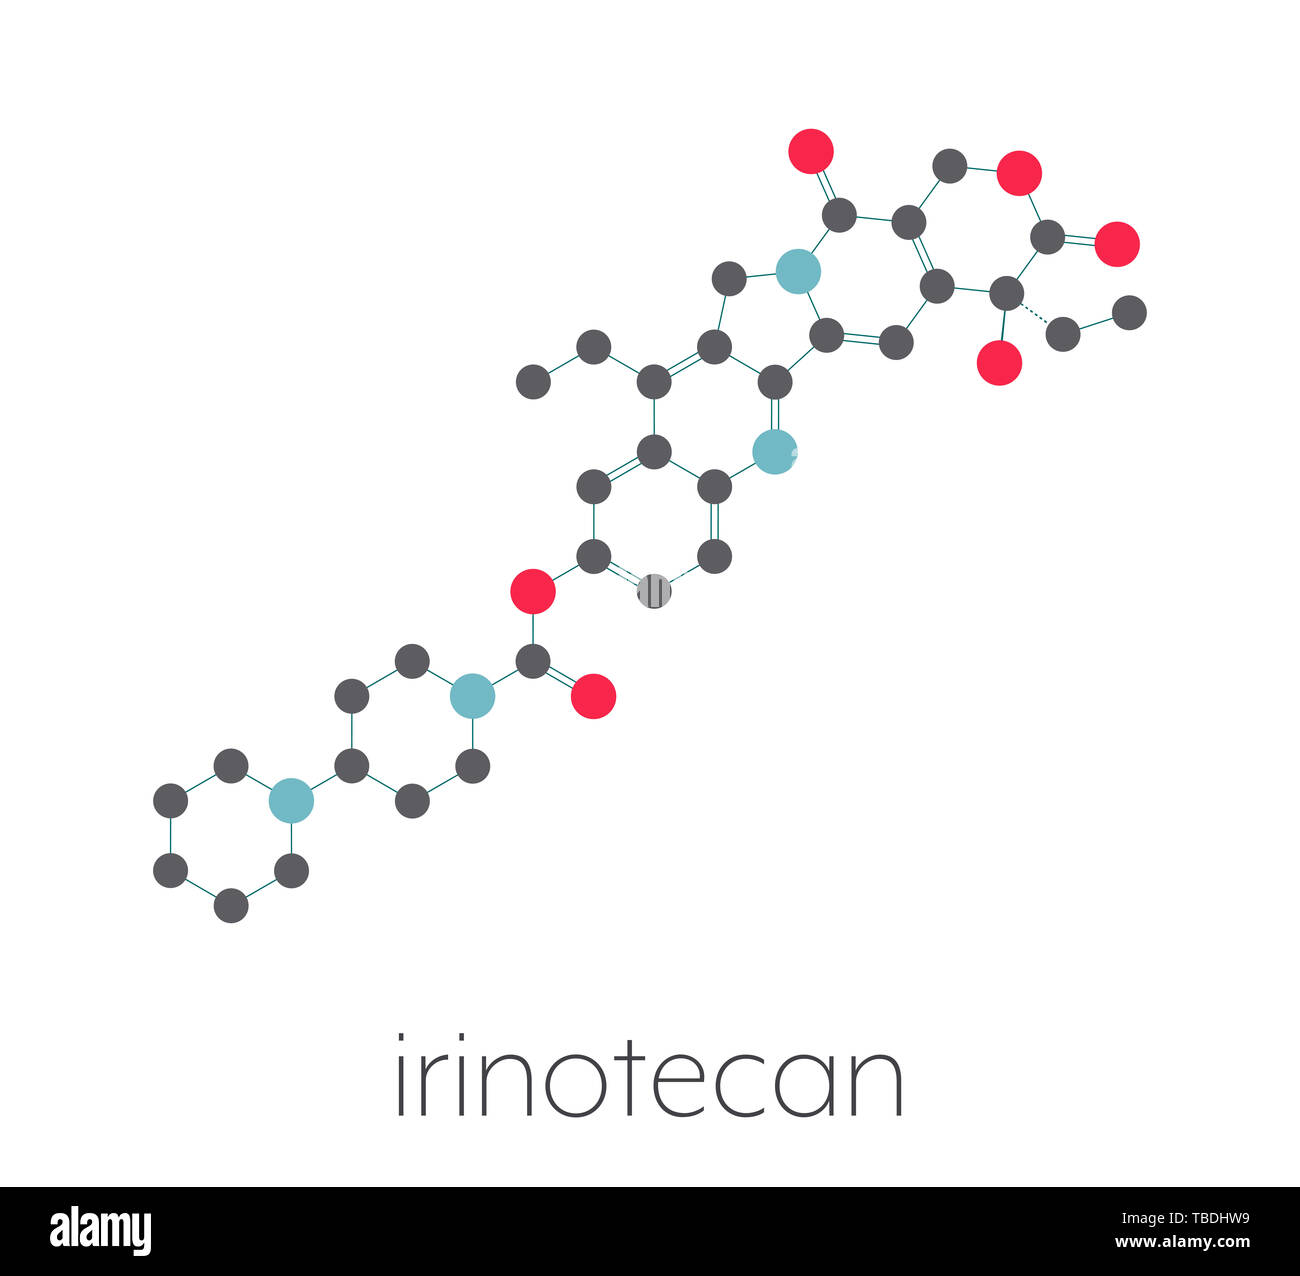 Irinotecan cancer chemotherapy drug molecule. Stylized skeletal formula (chemical structure). Atoms are shown as color-coded circles connected by thin bonds, on a white background: hydrogen (hidden), carbon (grey), nitrogen (blue), oxygen (red). Stock Photo